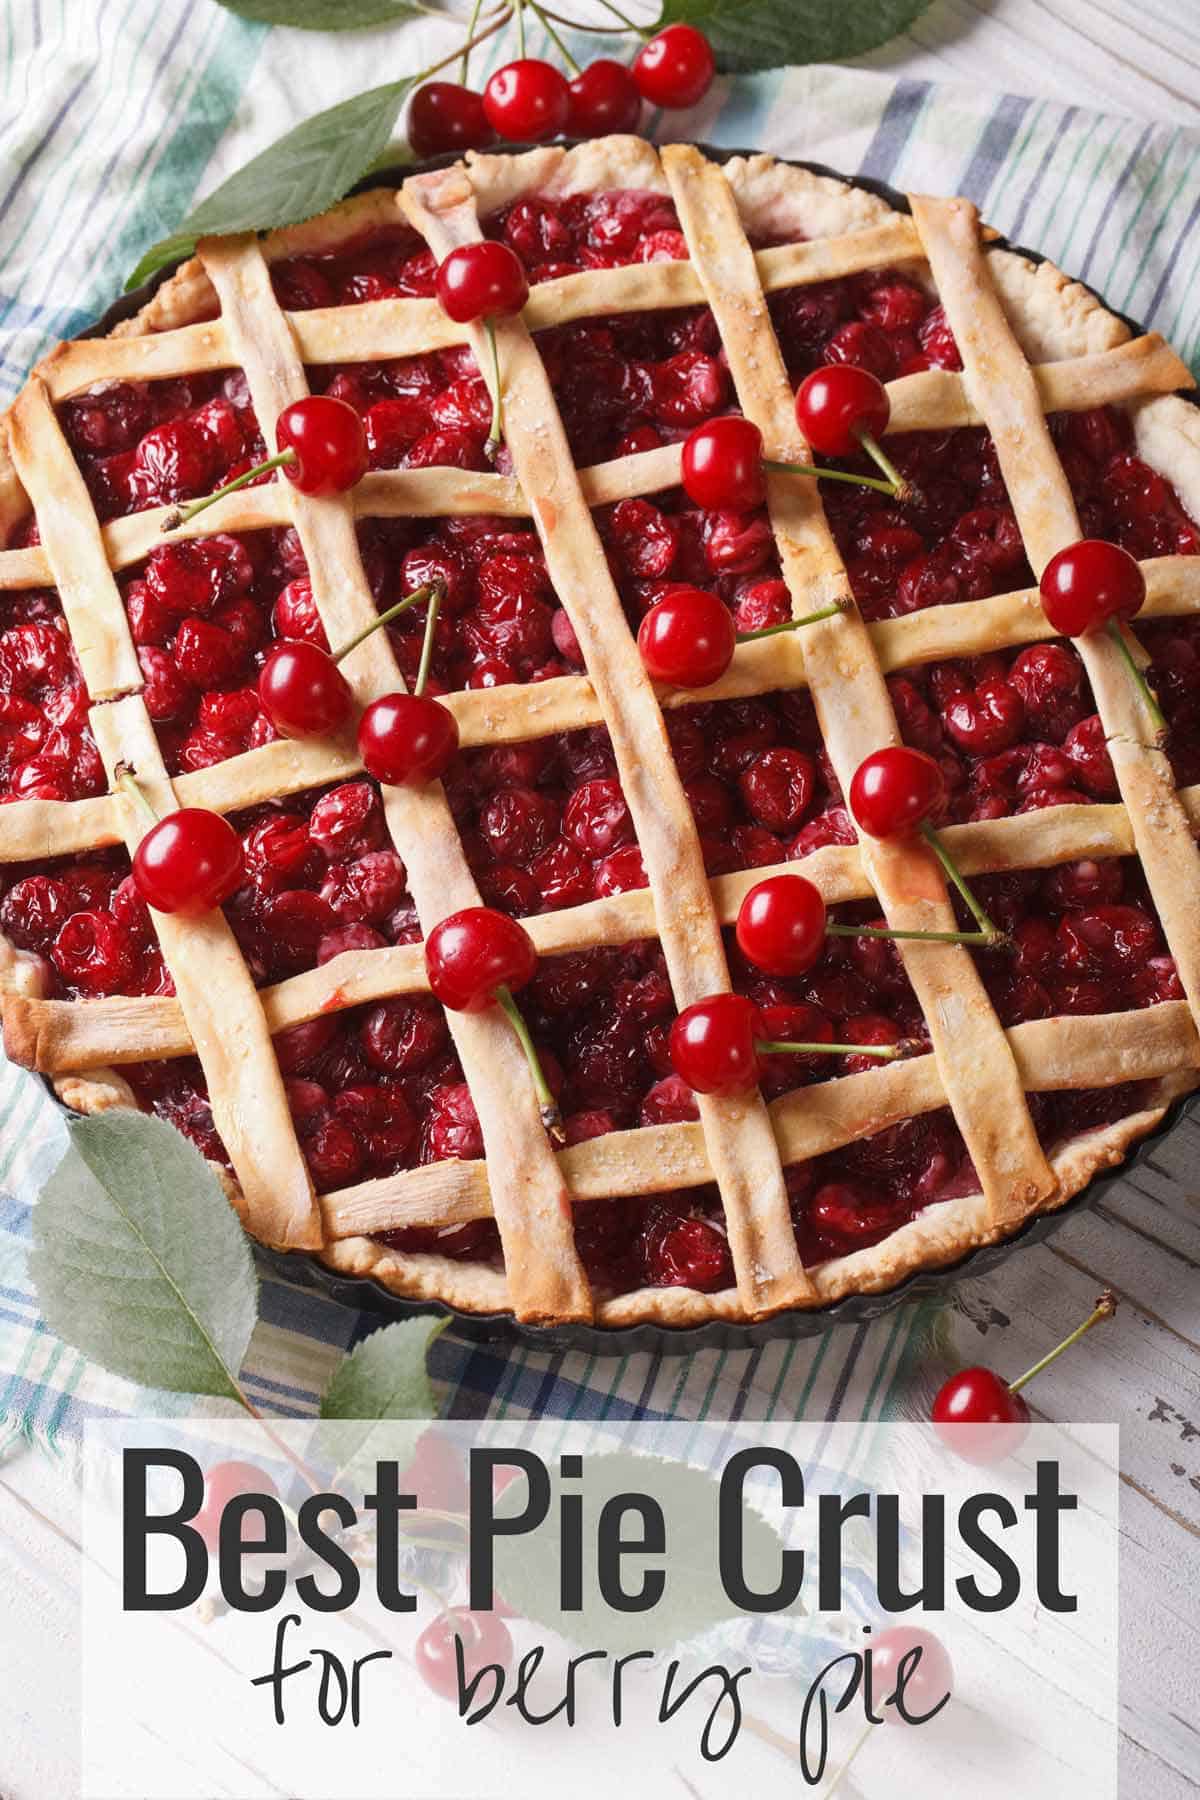 Cherry pie with butter crust, which is the best crust for berry pie.